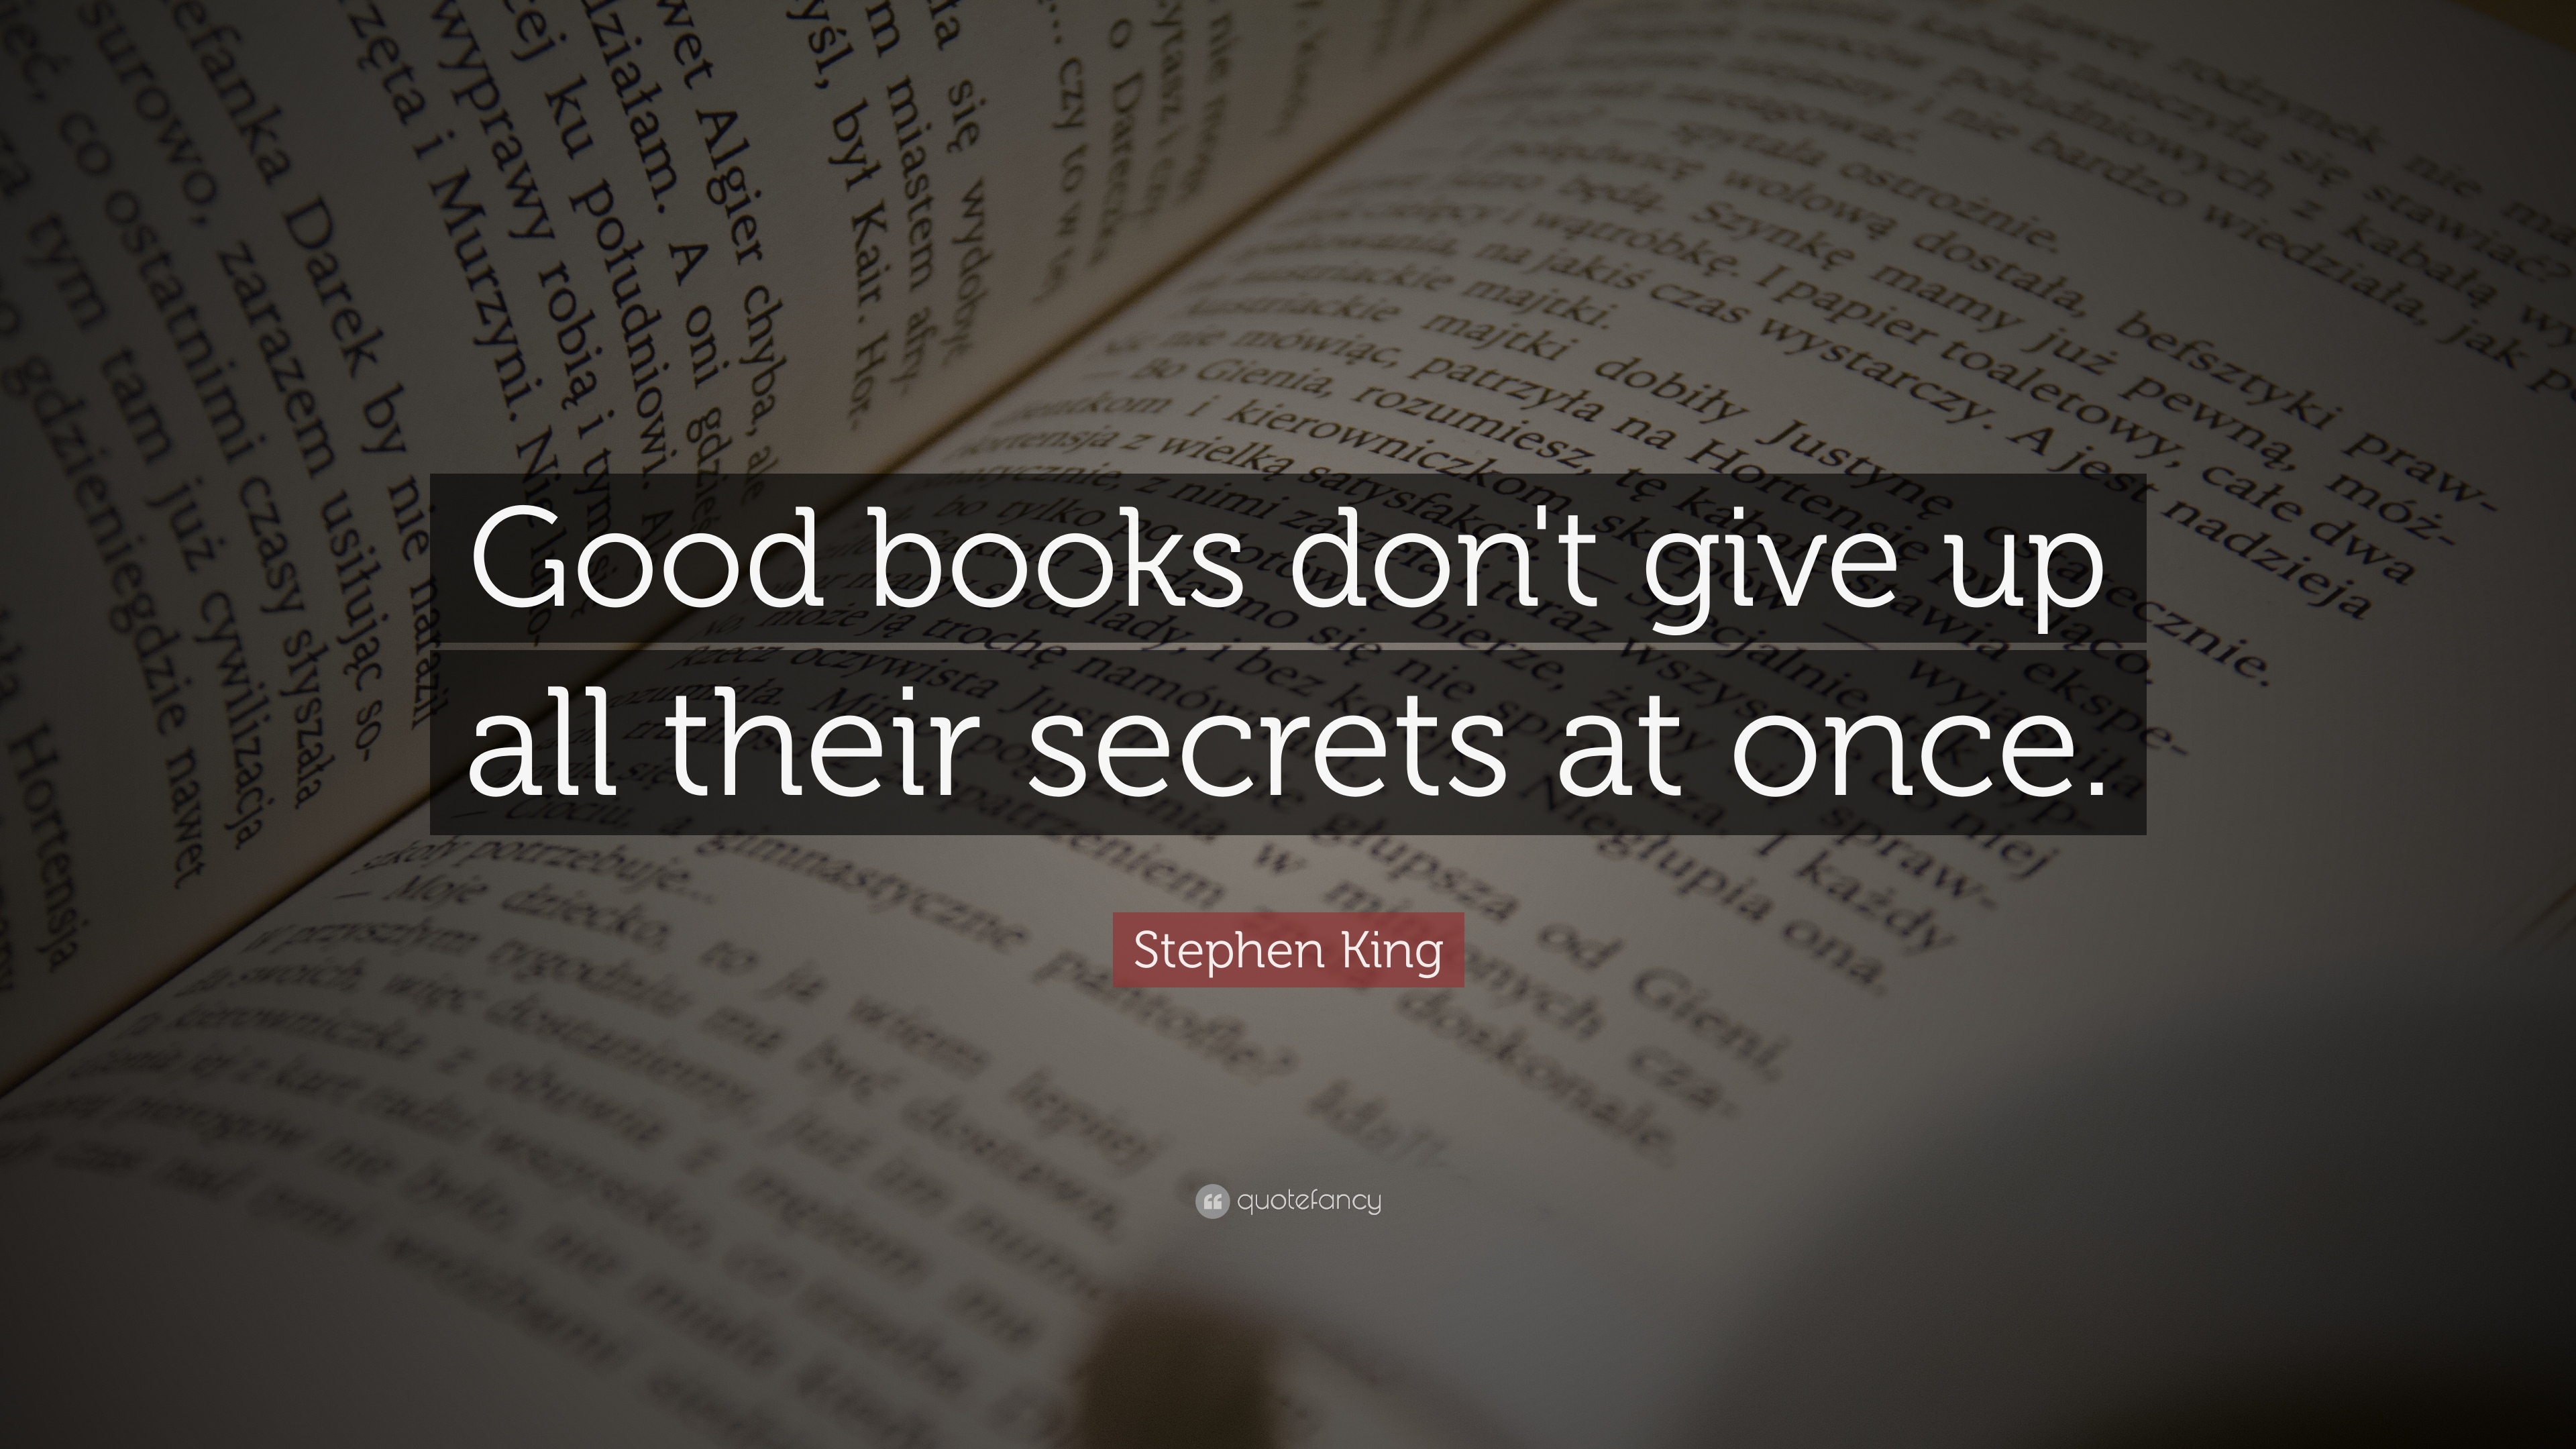 Stephen King Quote: “Good books don't give up all their secrets at ...